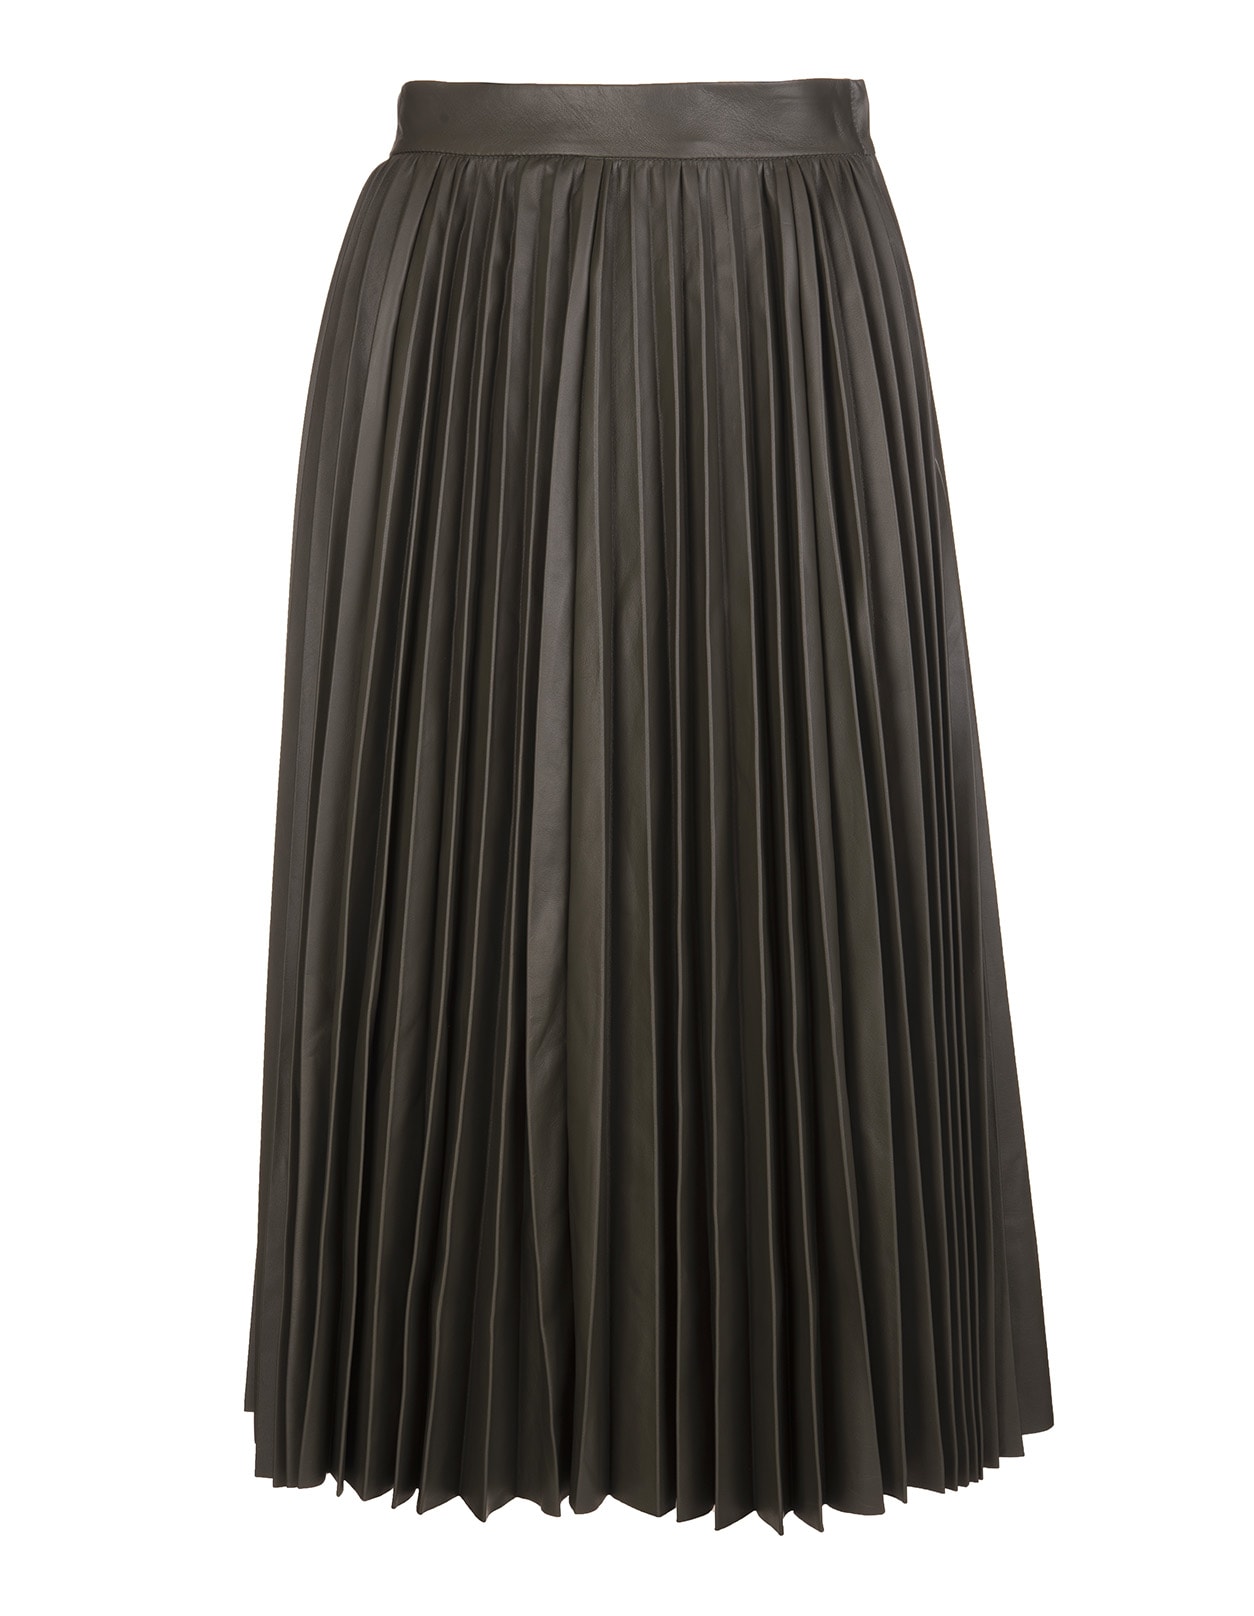 RED Valentino Military Green Leather Pleated Skirt